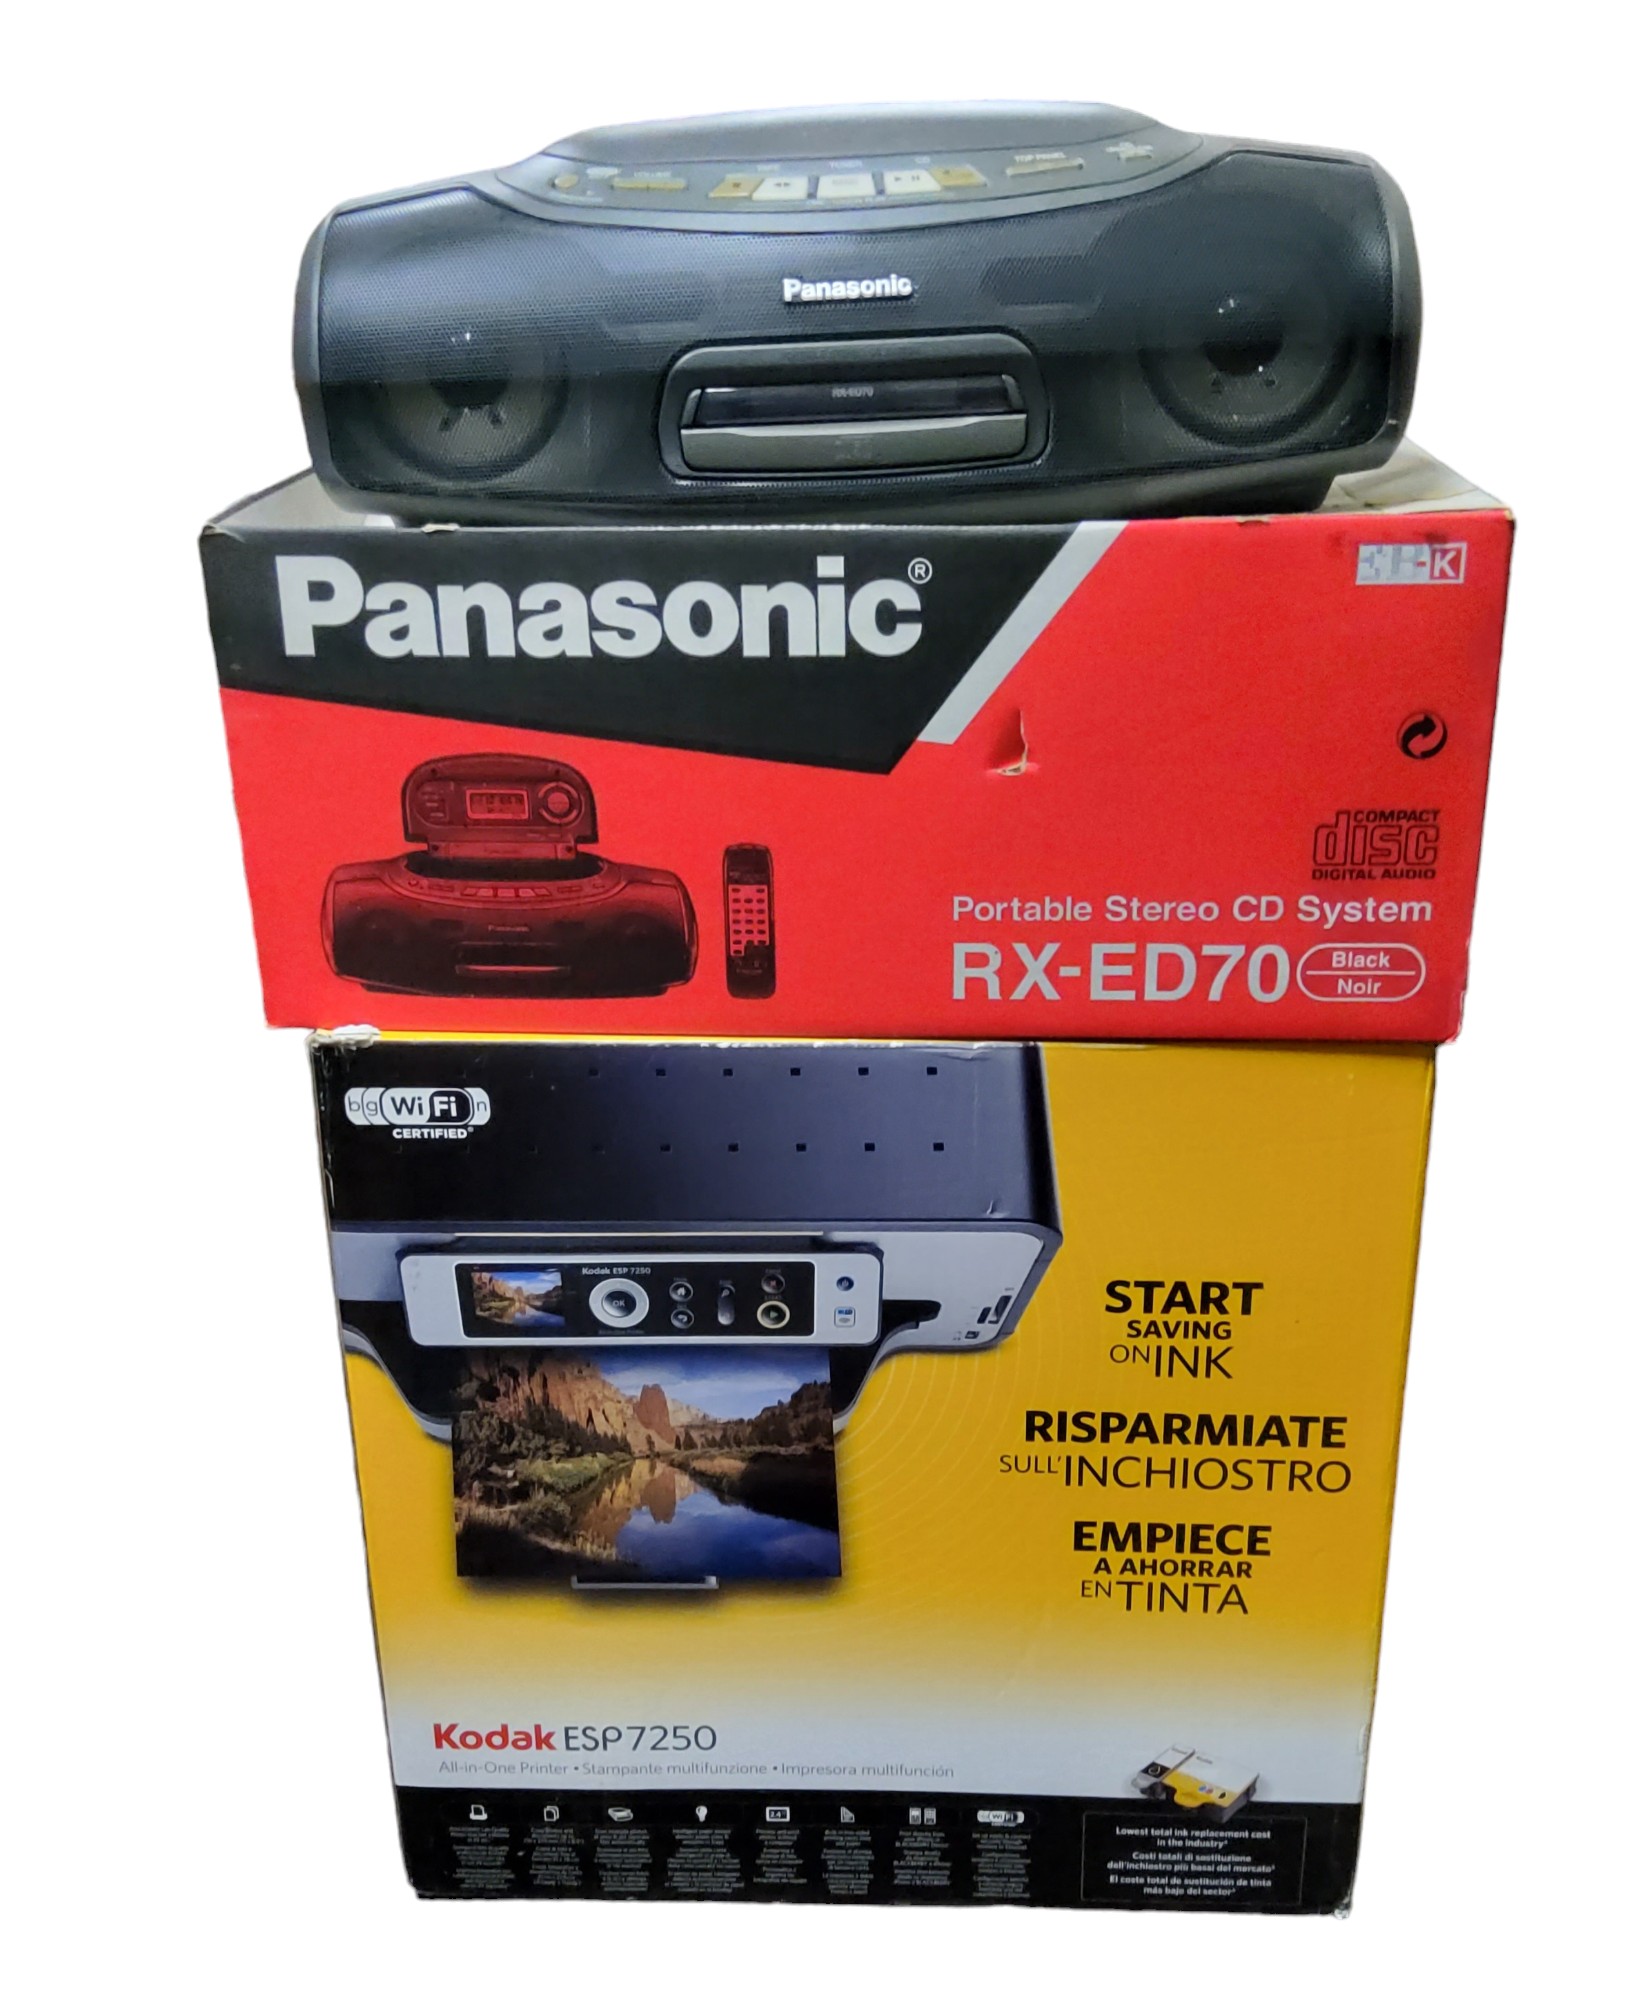 A Kodak ESP 7250 All-in-One Printer, as new, in unopened still sealed box; a Panasonic RX-ED70